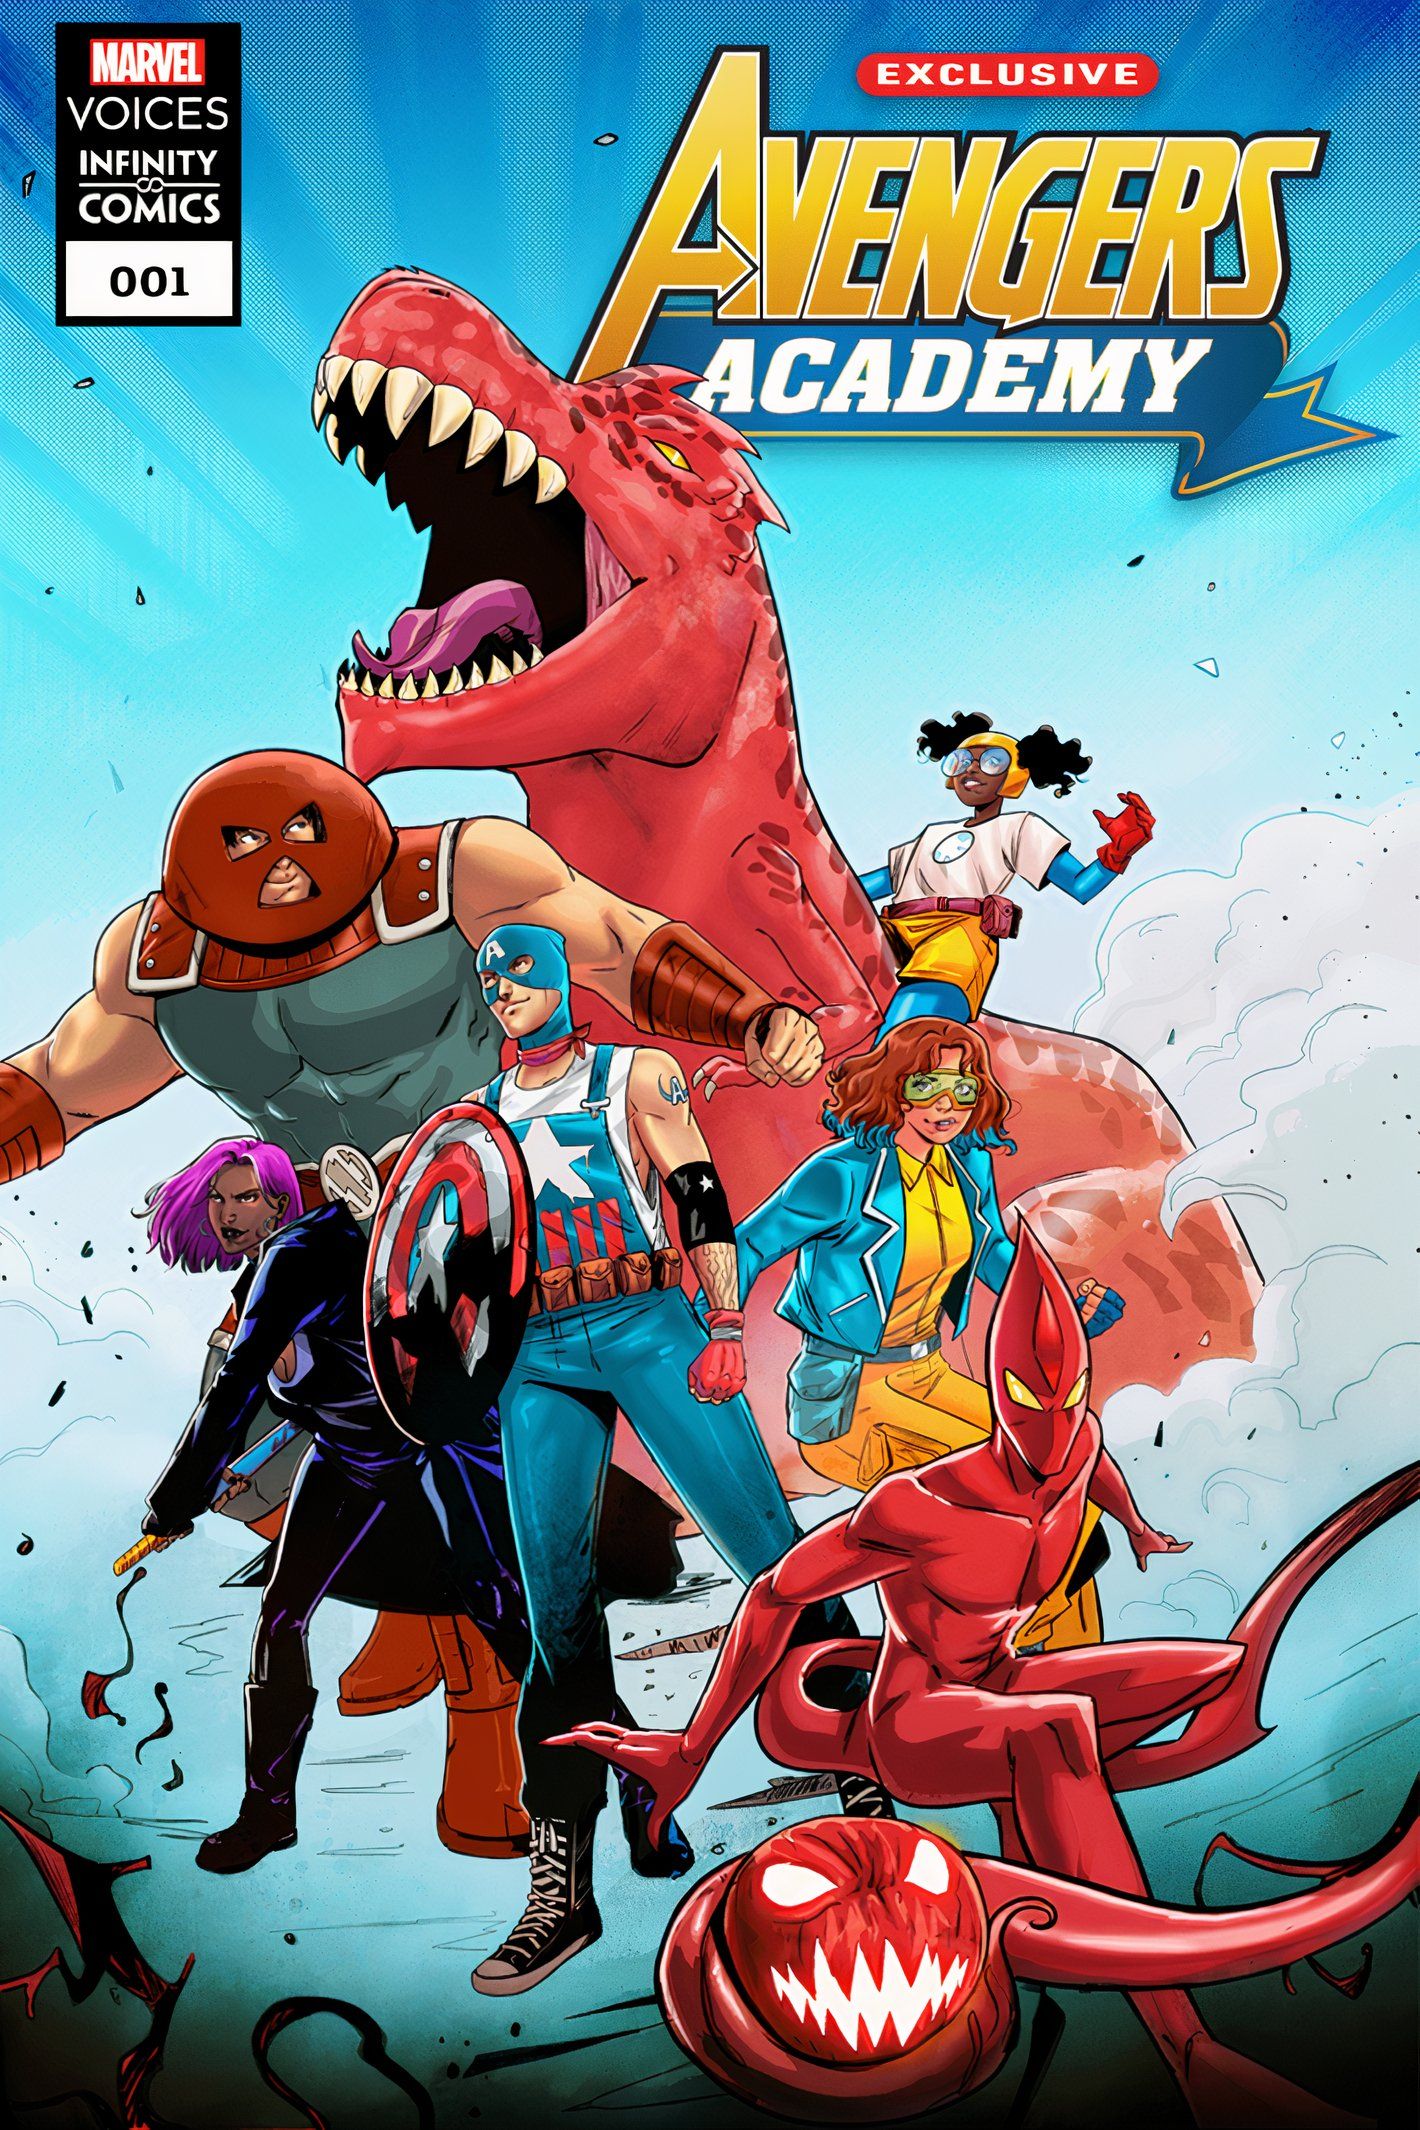 Avengers Academy: Marvel Voices #1 cover, featuring Kid Juggernaut, Red Goblin, and other upcoming young heroes.